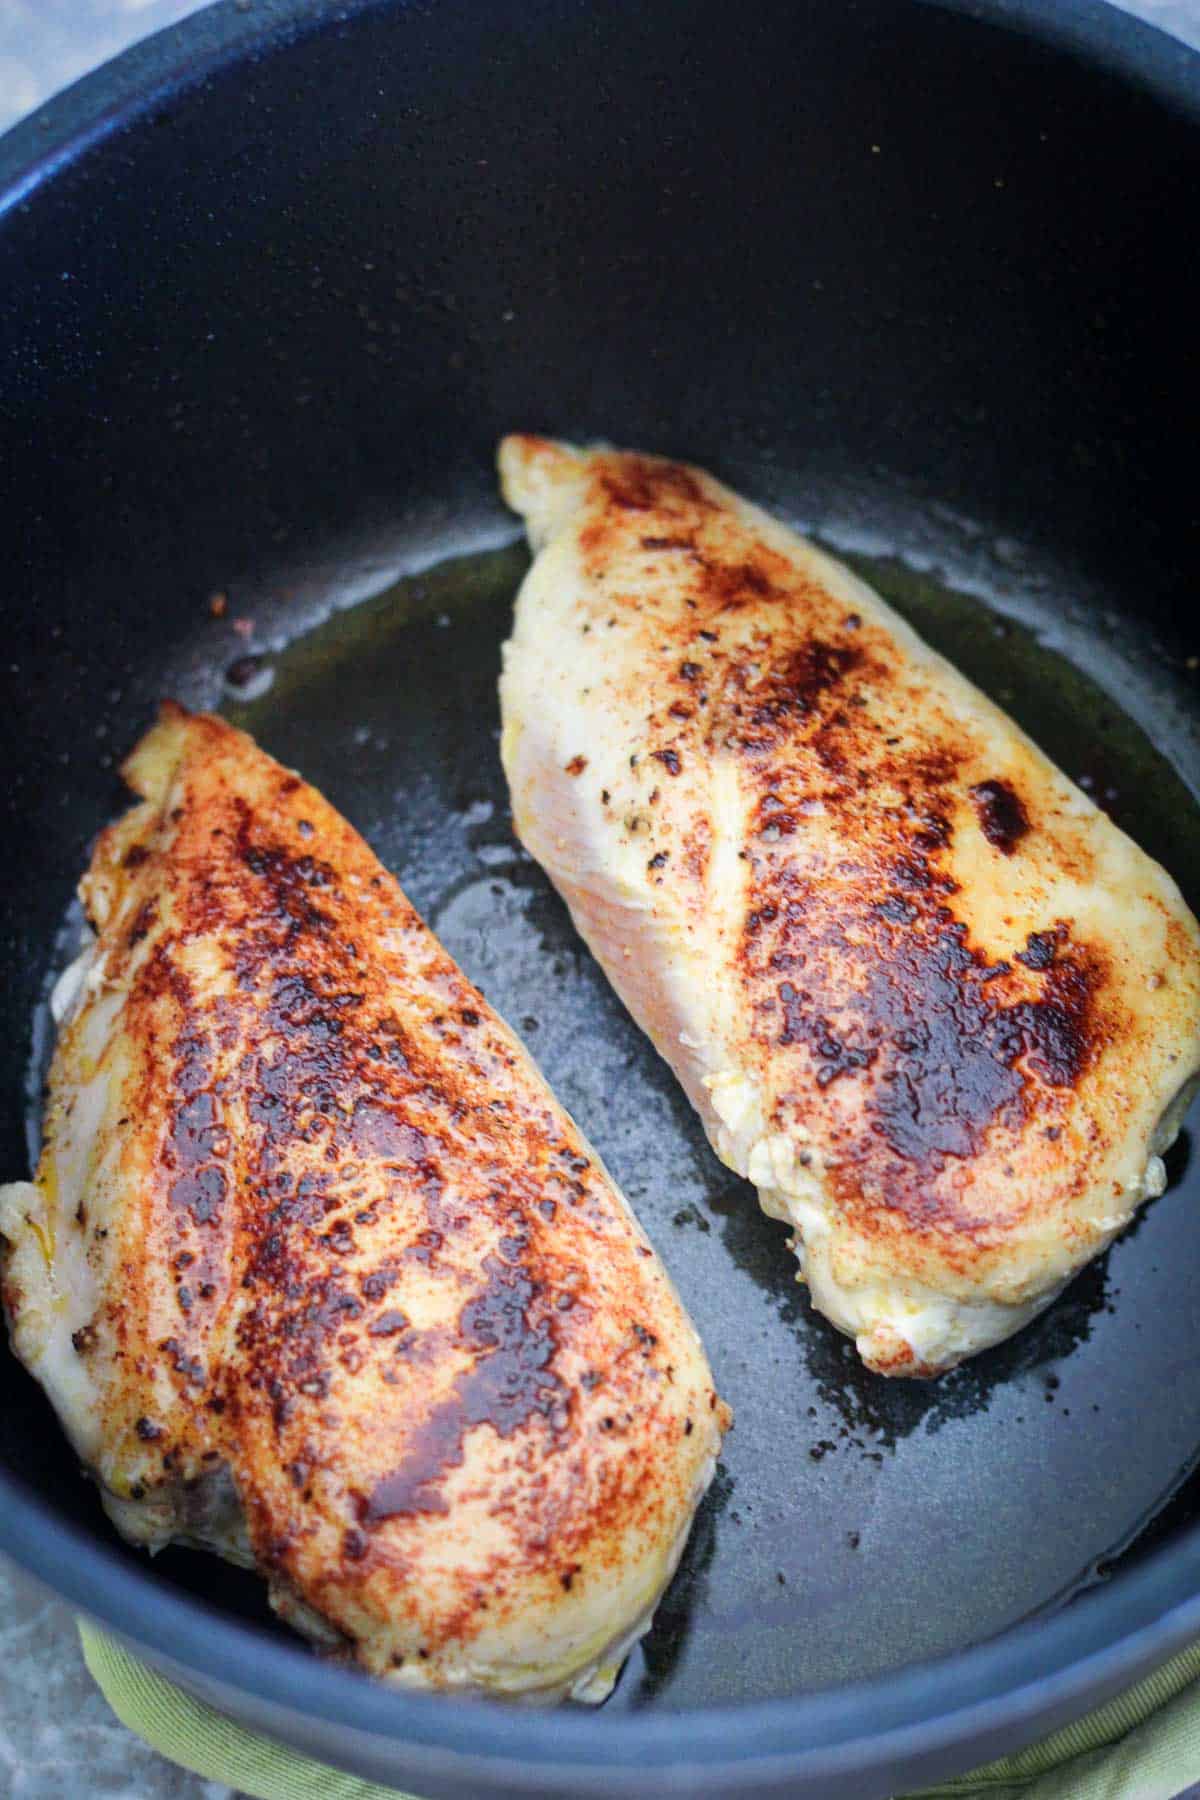 Browning chicken breast in the pressure cooker. Chicken breasts seem completely cooked on one side and are cooking on the other side. 